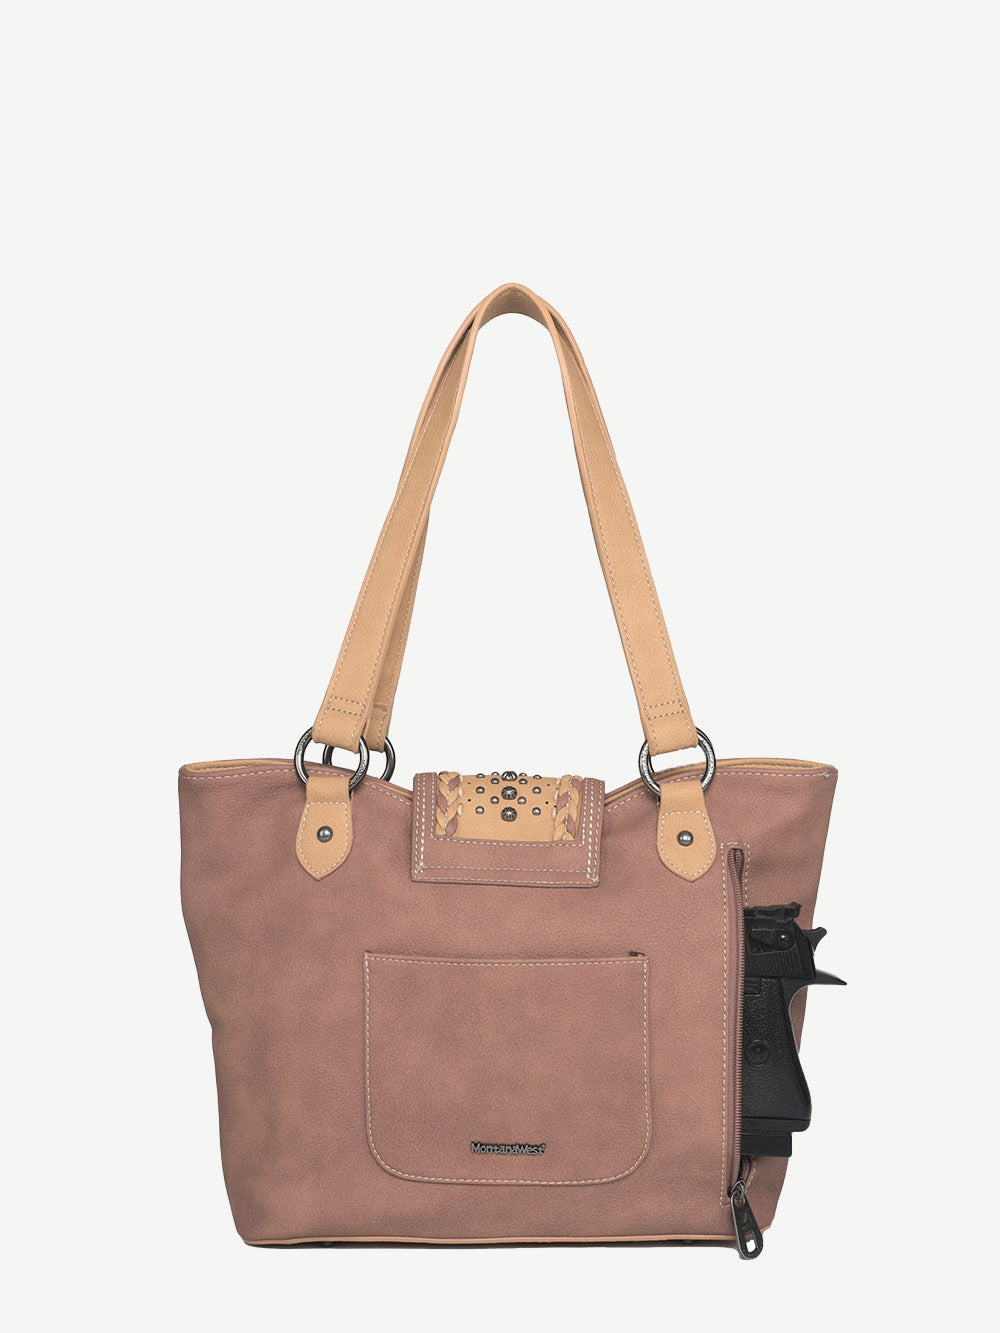 Bella Leather Tote Bags | women's Concealed Carry Purse –  www.itsinthebagboutique.com